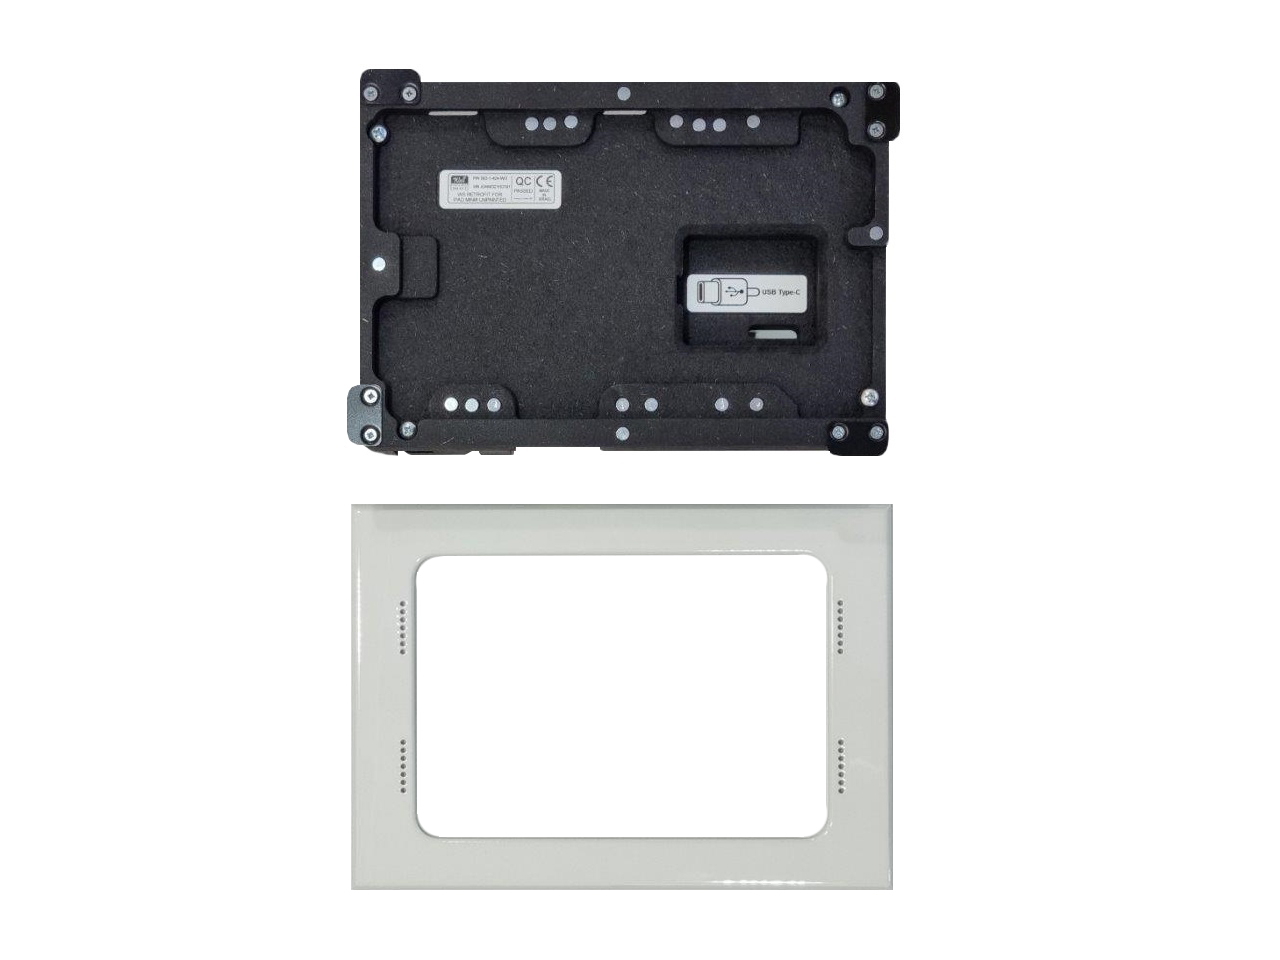 002-1-424-WH Retrofit Mount for Ipad Mini 6 - White by Wall-Smart